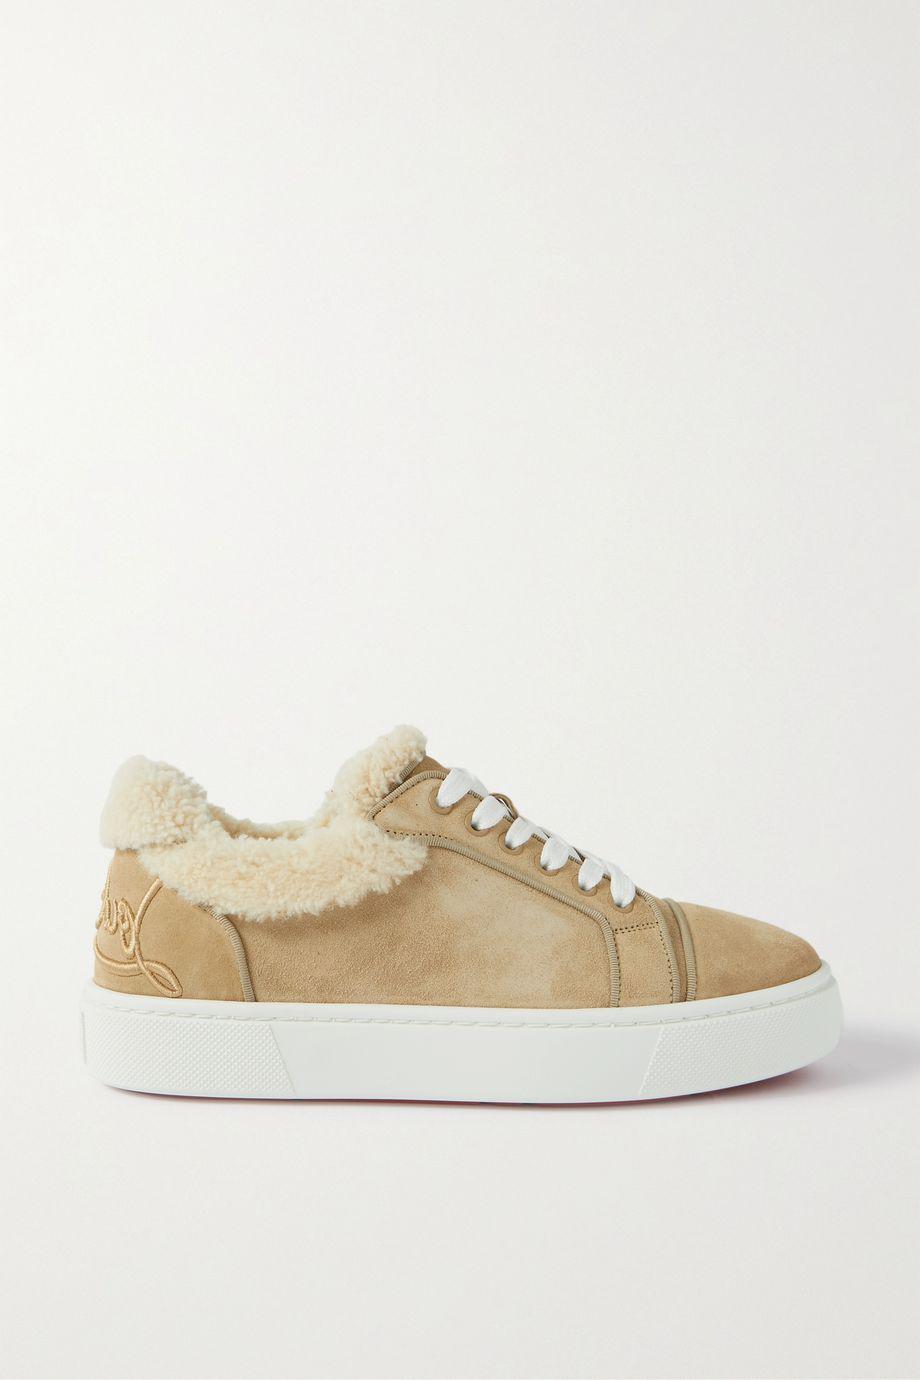 Fun Vierissima shearling-lined suede sneakers by CHRISTIAN LOUBOUTIN